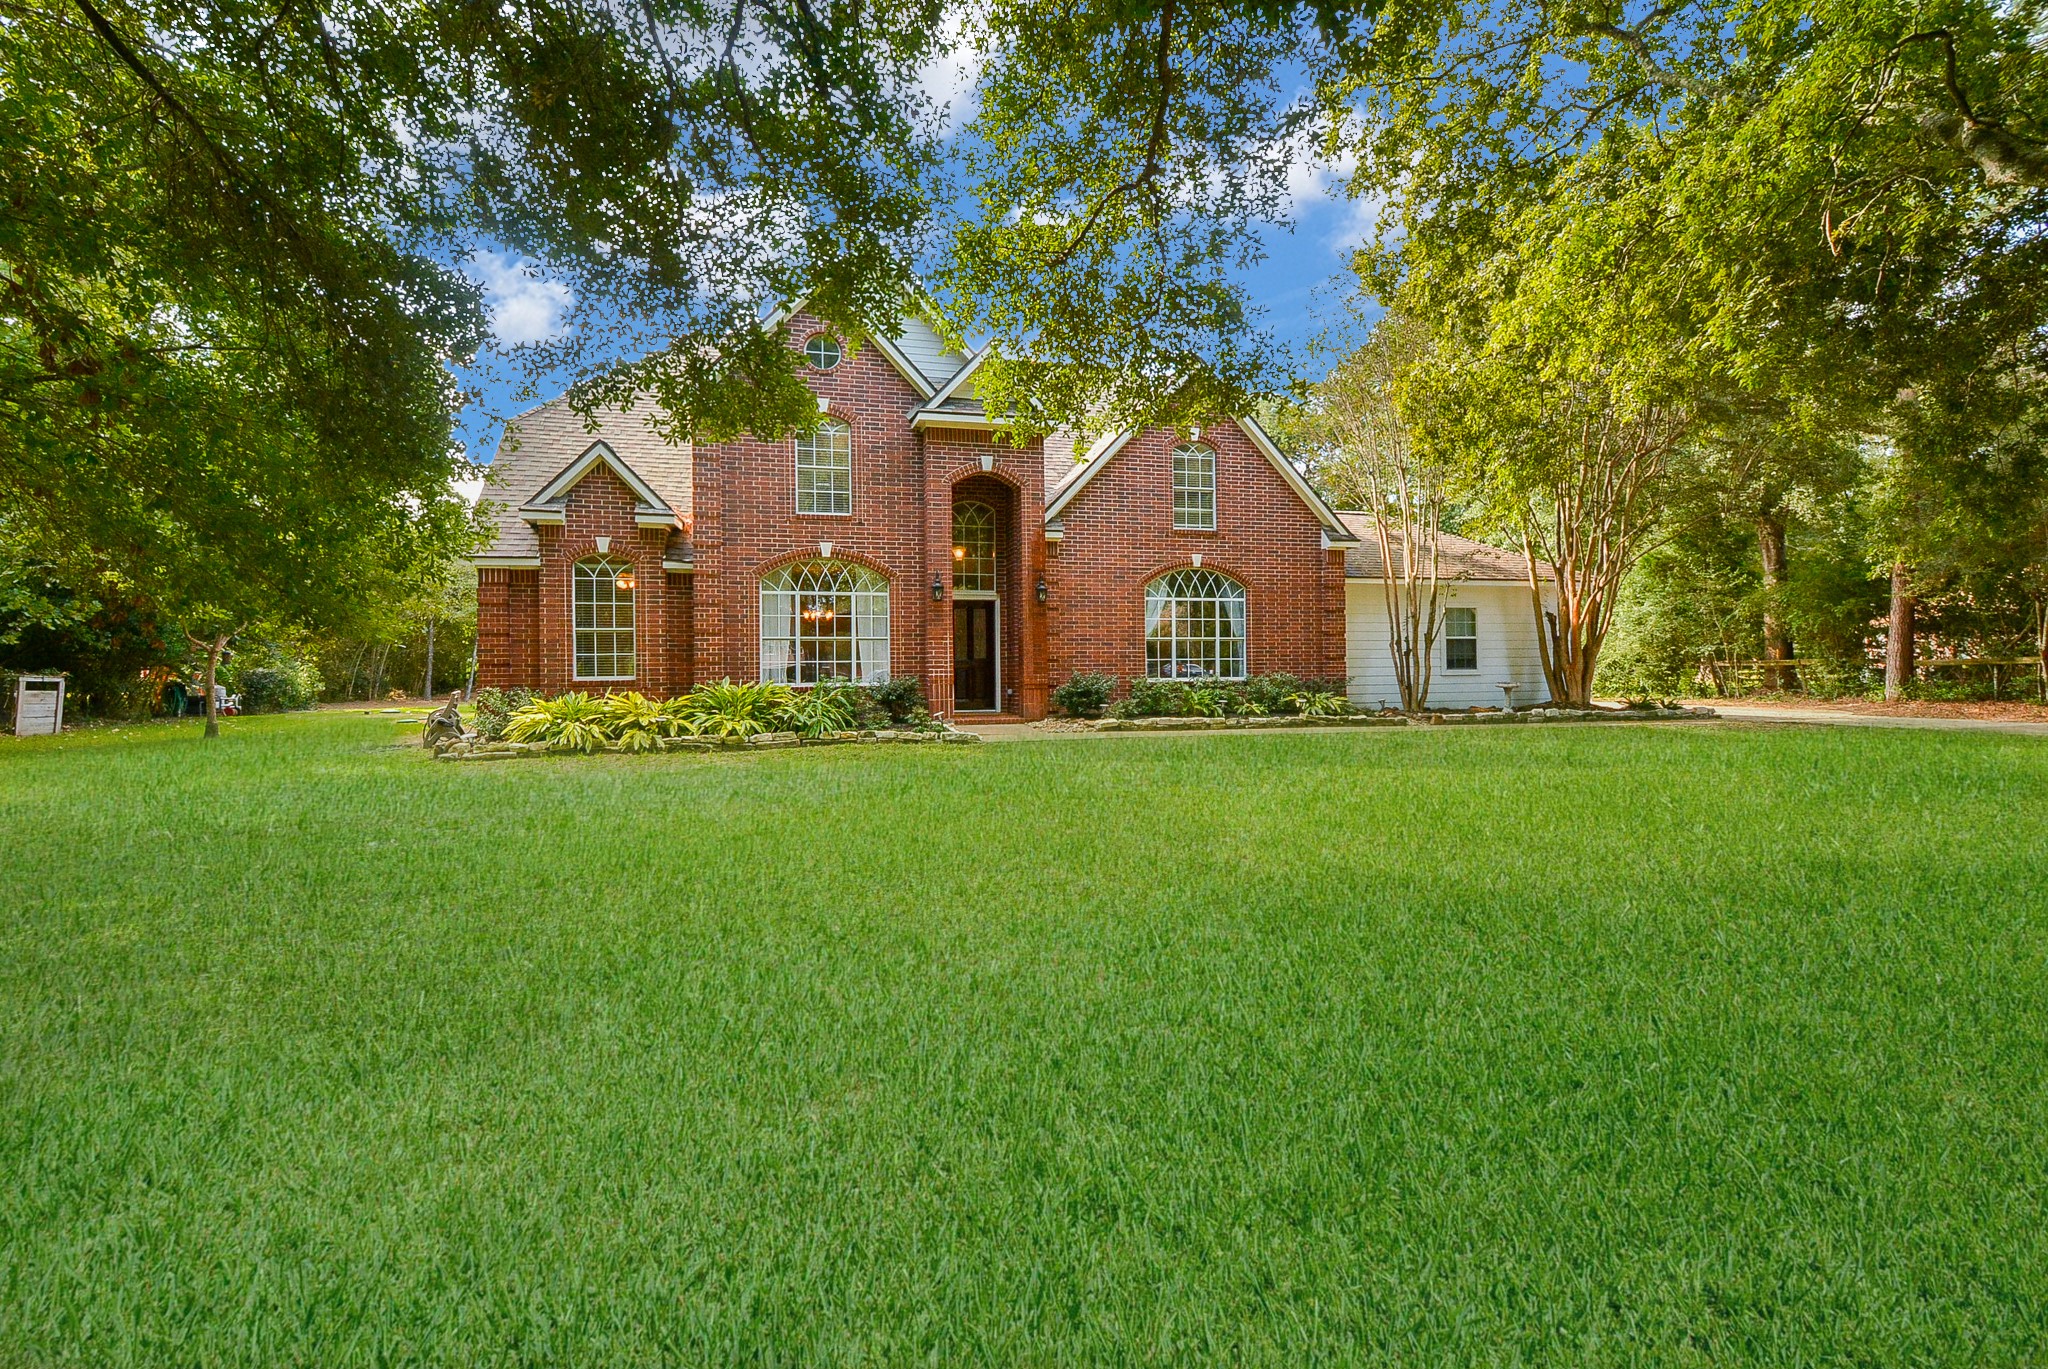 Welcome home to this beautiful estate home situated on a 1.15 acre wooded lot on a cul-de-sac.